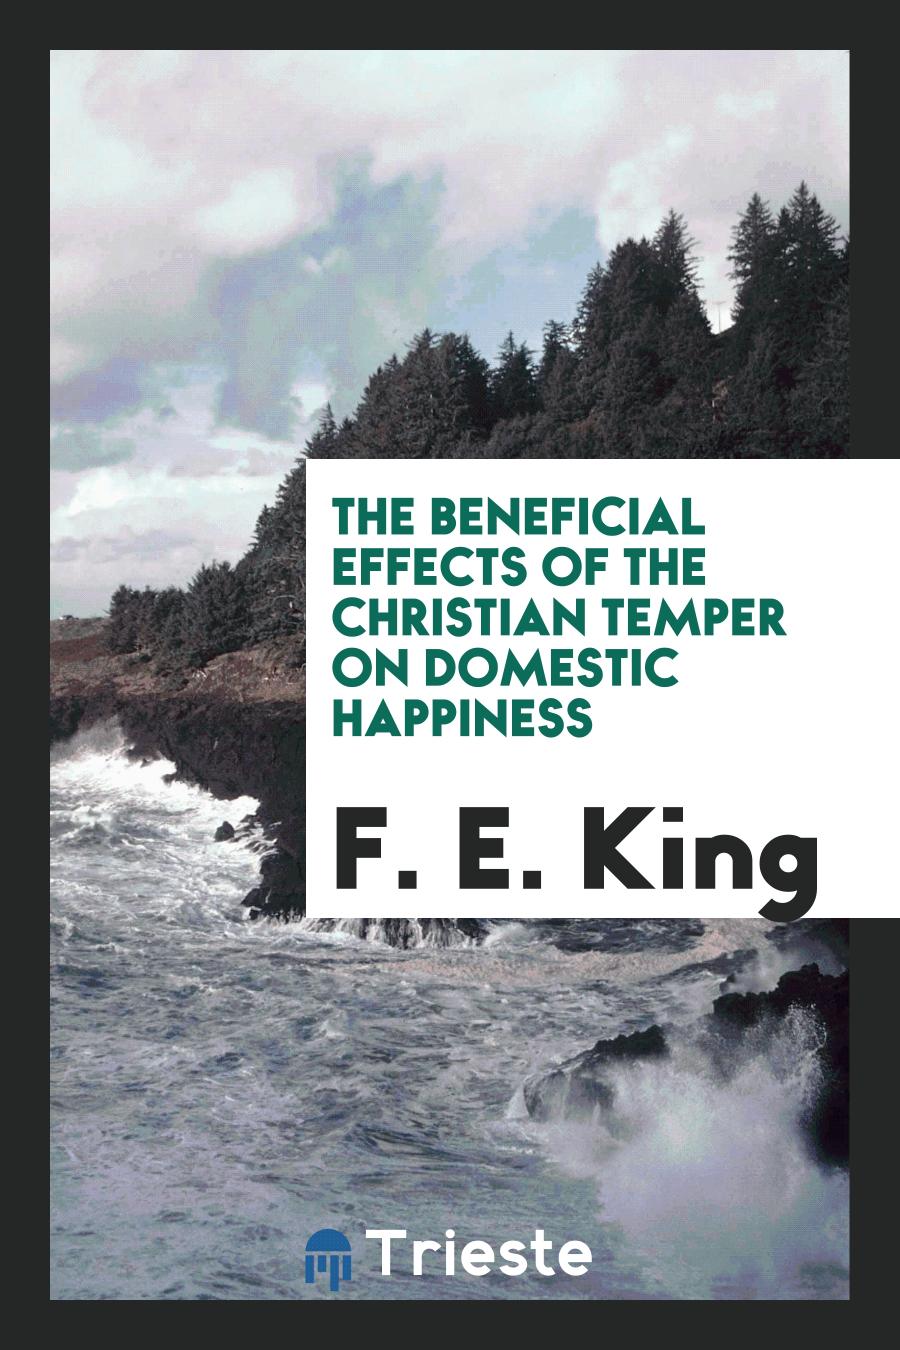 The Beneficial Effects of the Christian Temper on Domestic Happiness